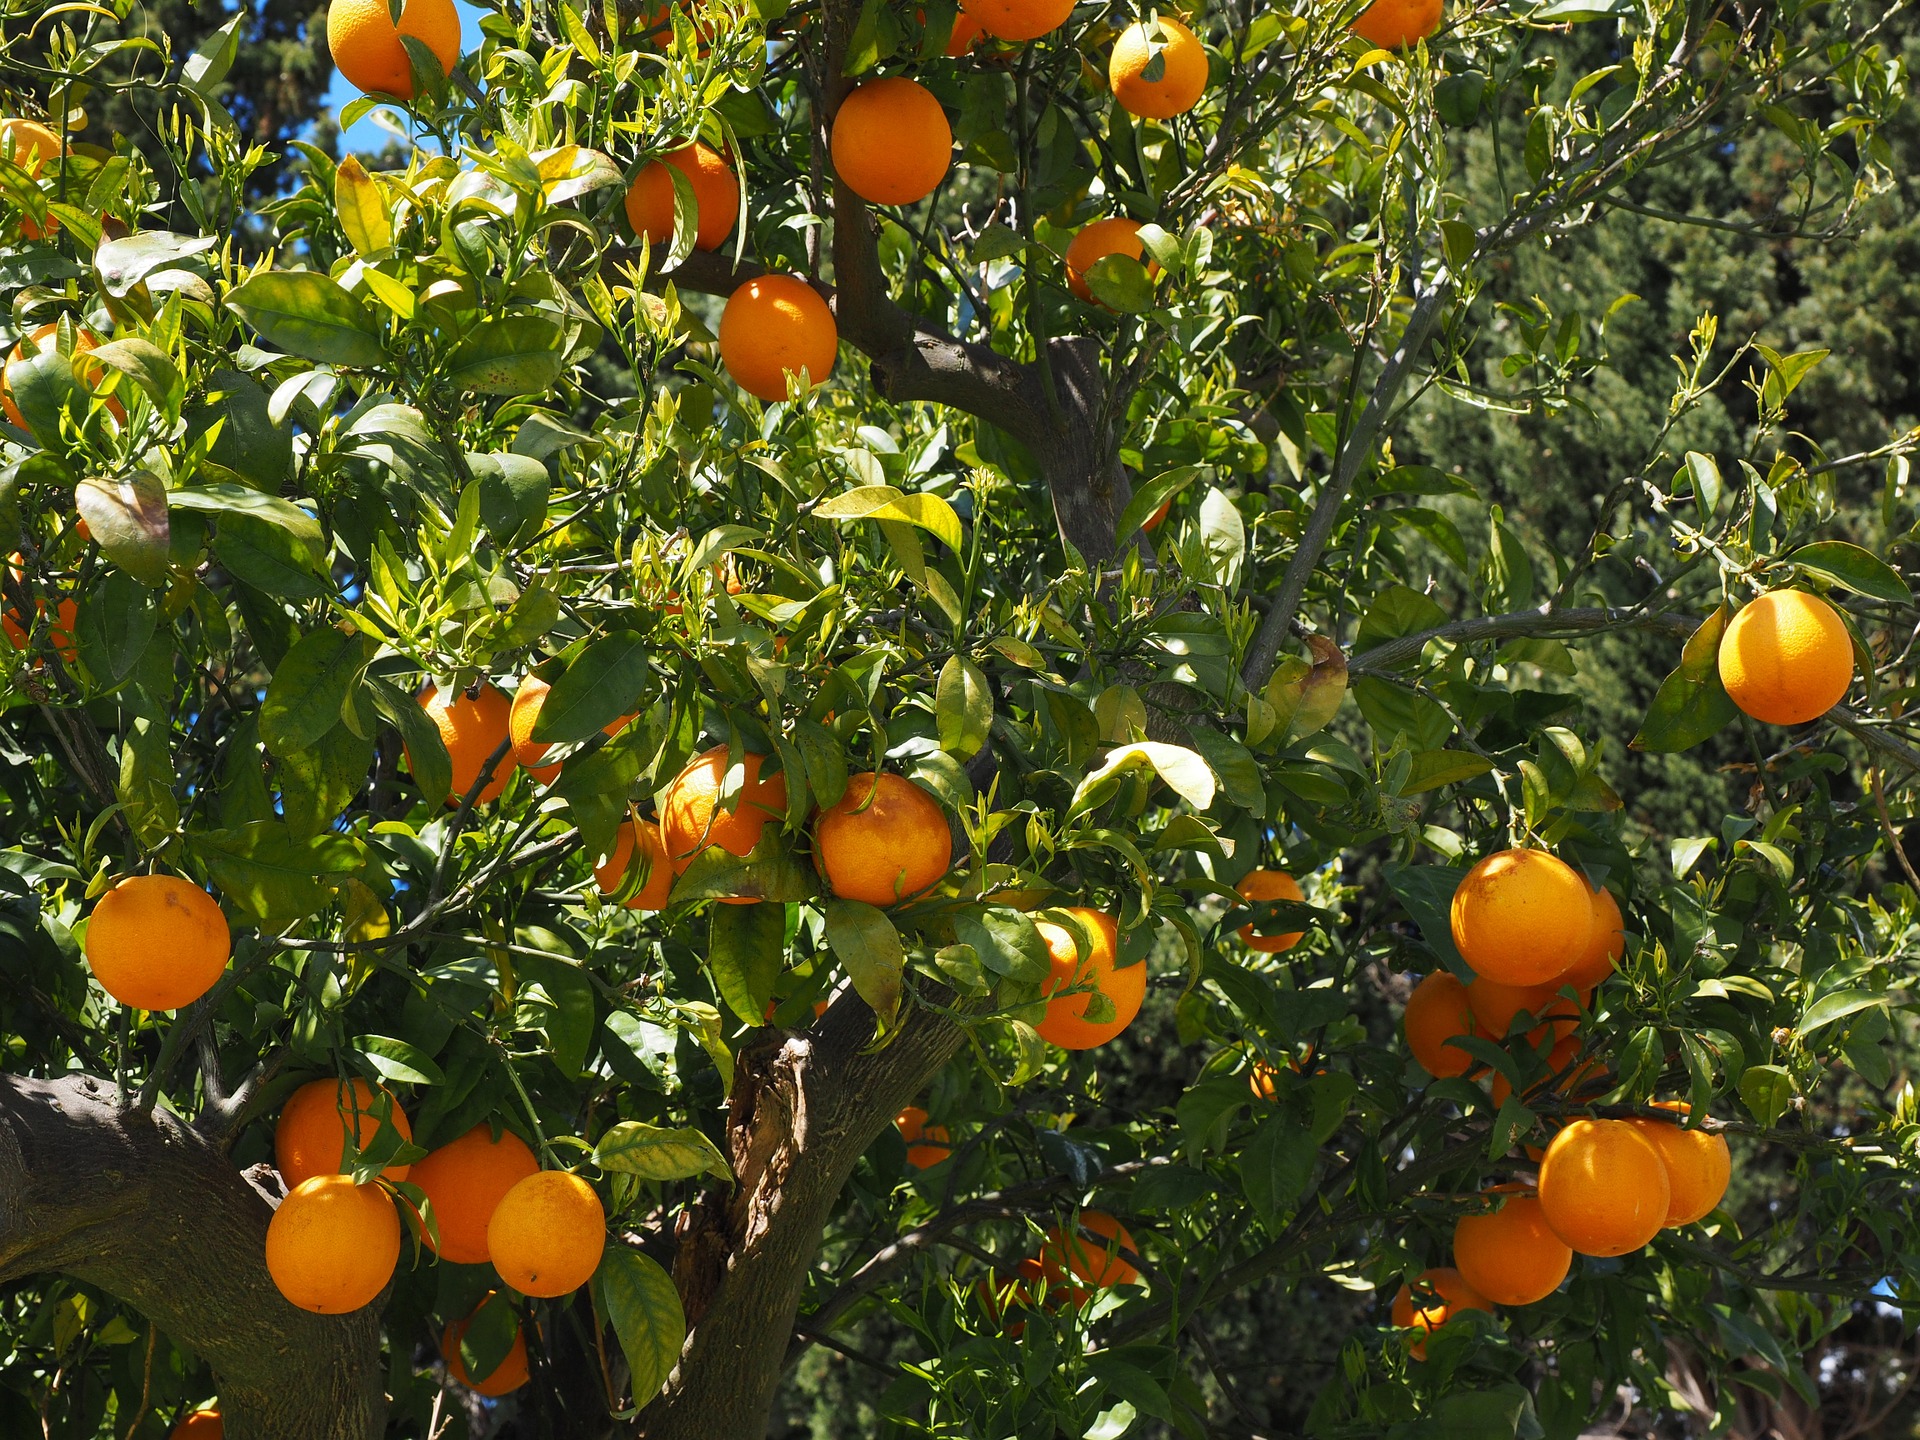 Oranges hanging from a green tree.